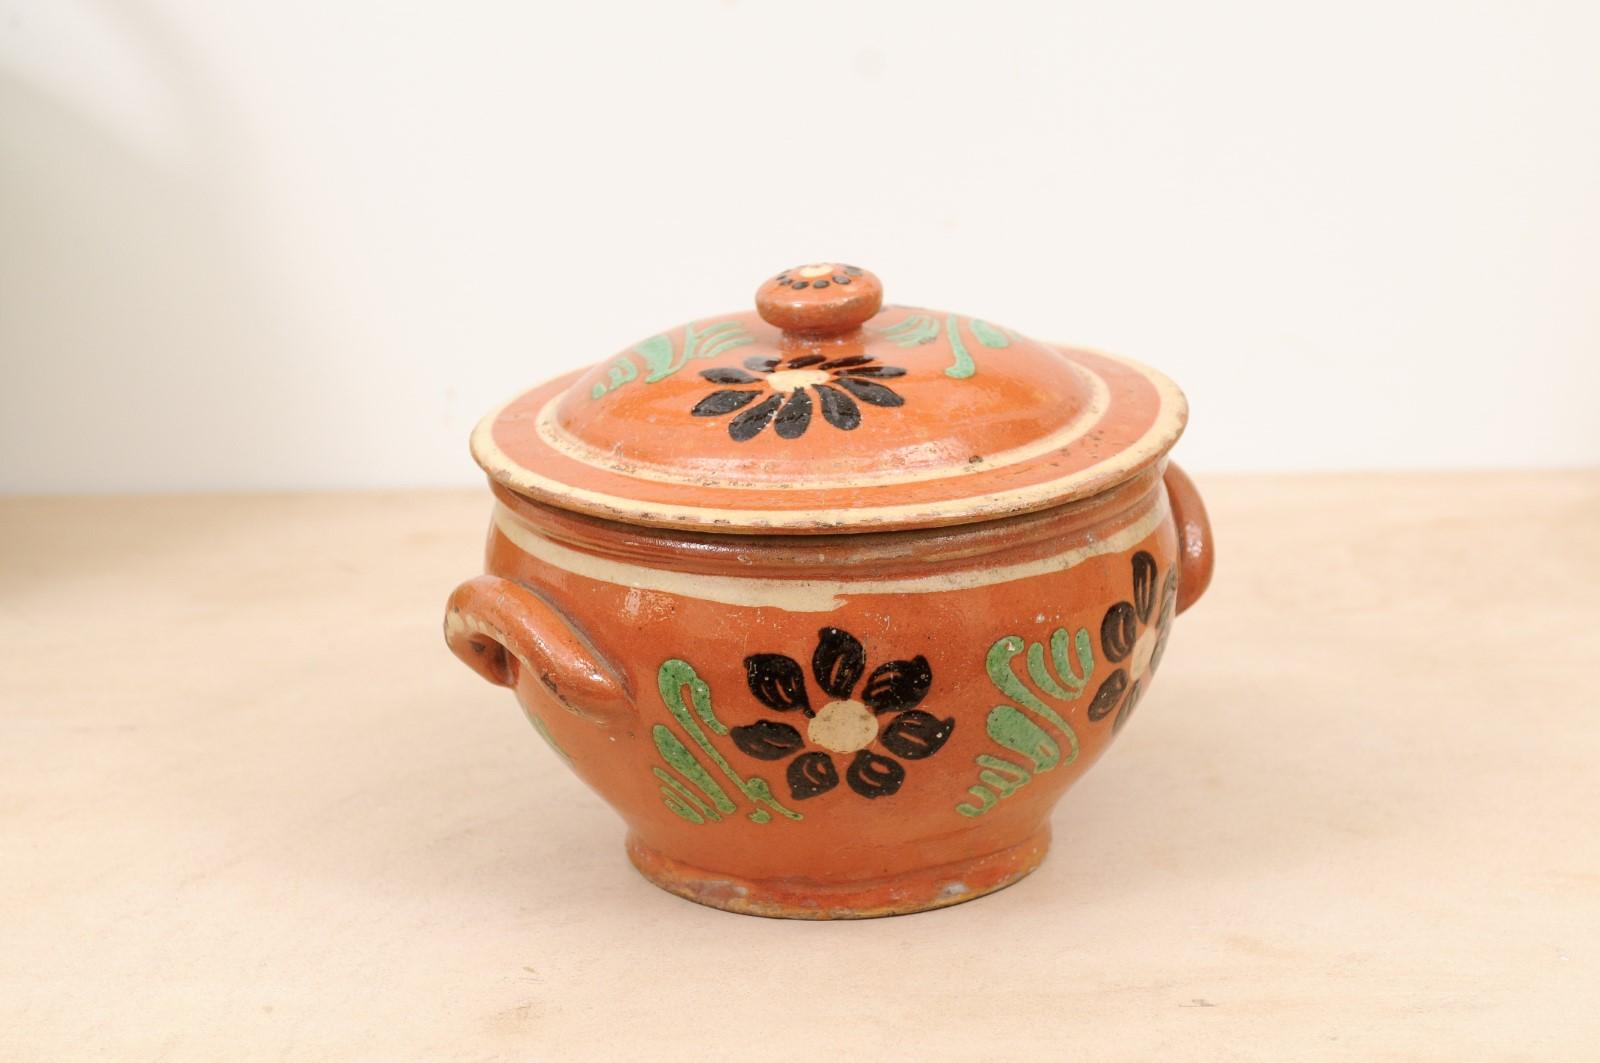 A French rustic glazed terracotta covered baking dish from the 19th century, with brown and green floral décor. Created in France during the 19th century, this covered baking dish features a circular lid topped with a petite handle, sitting above a